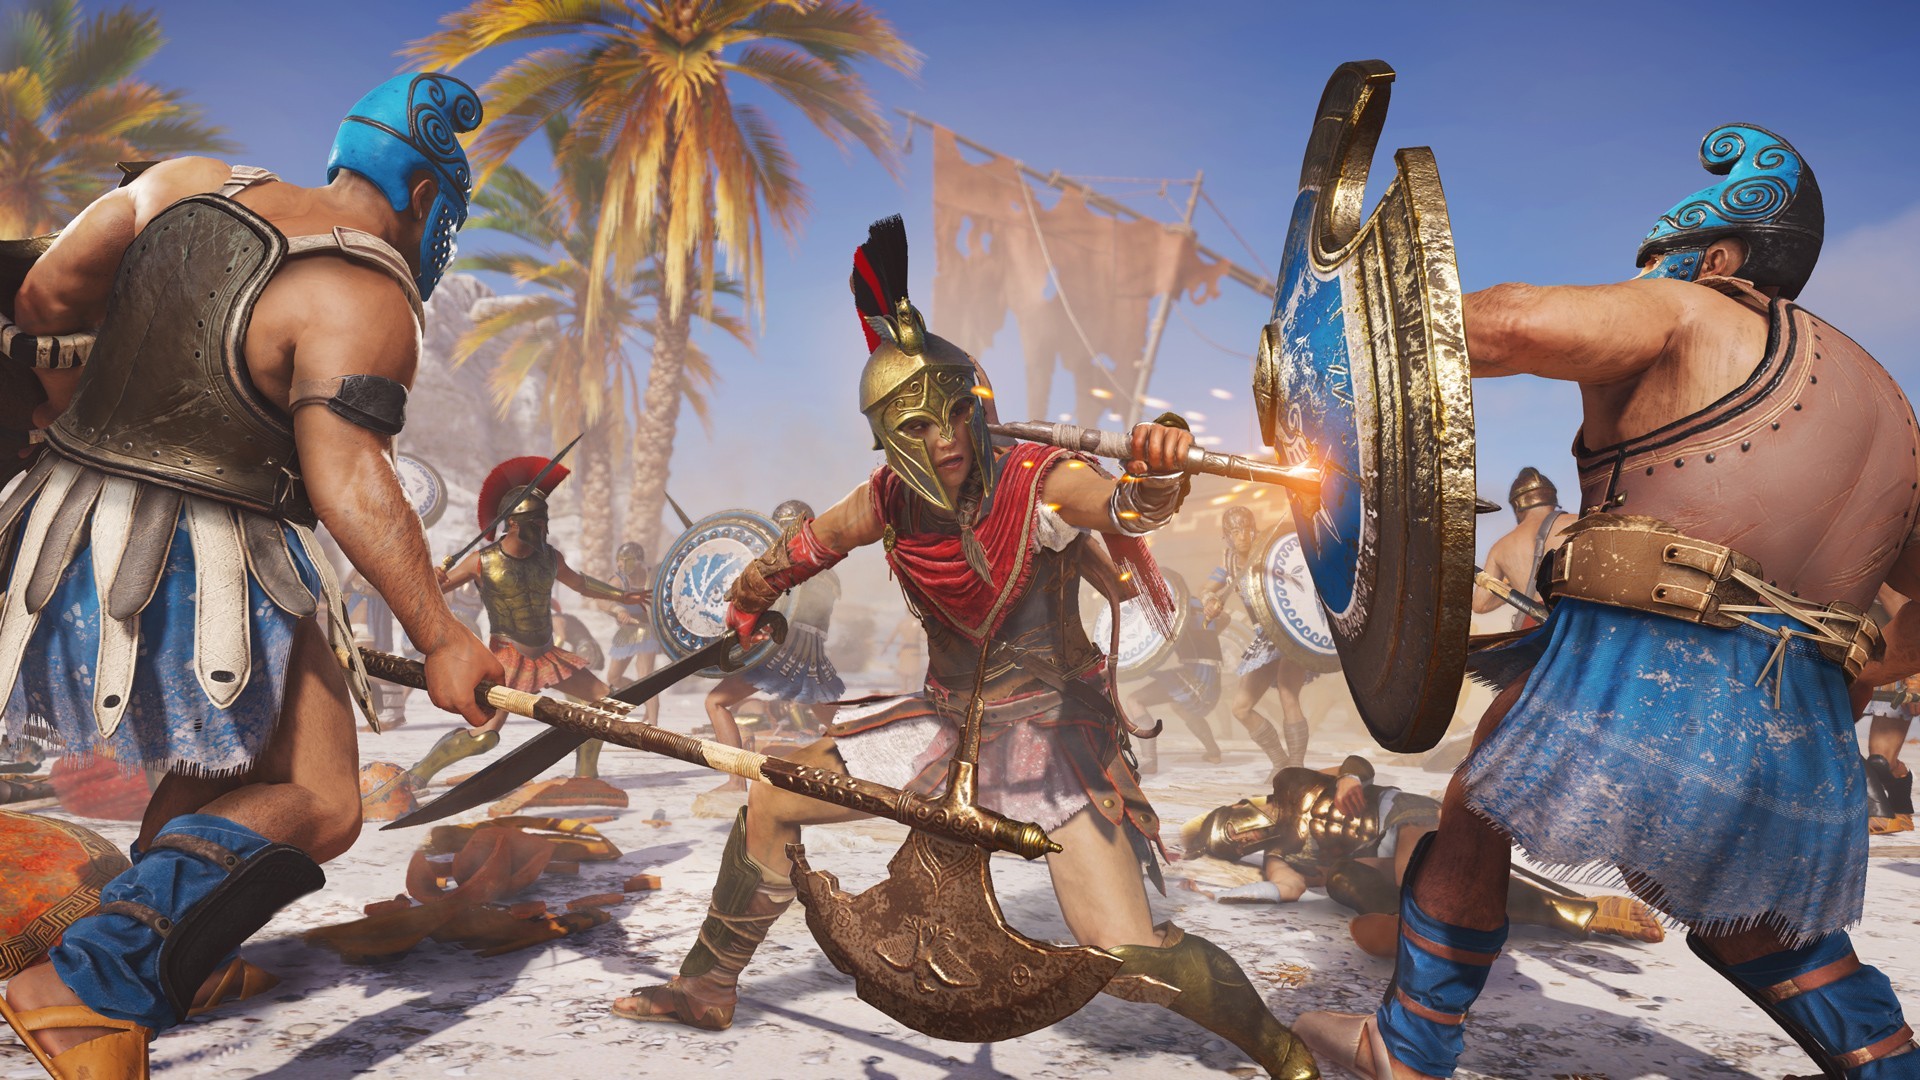 assassin's creed odyssey season pass ps4 discount